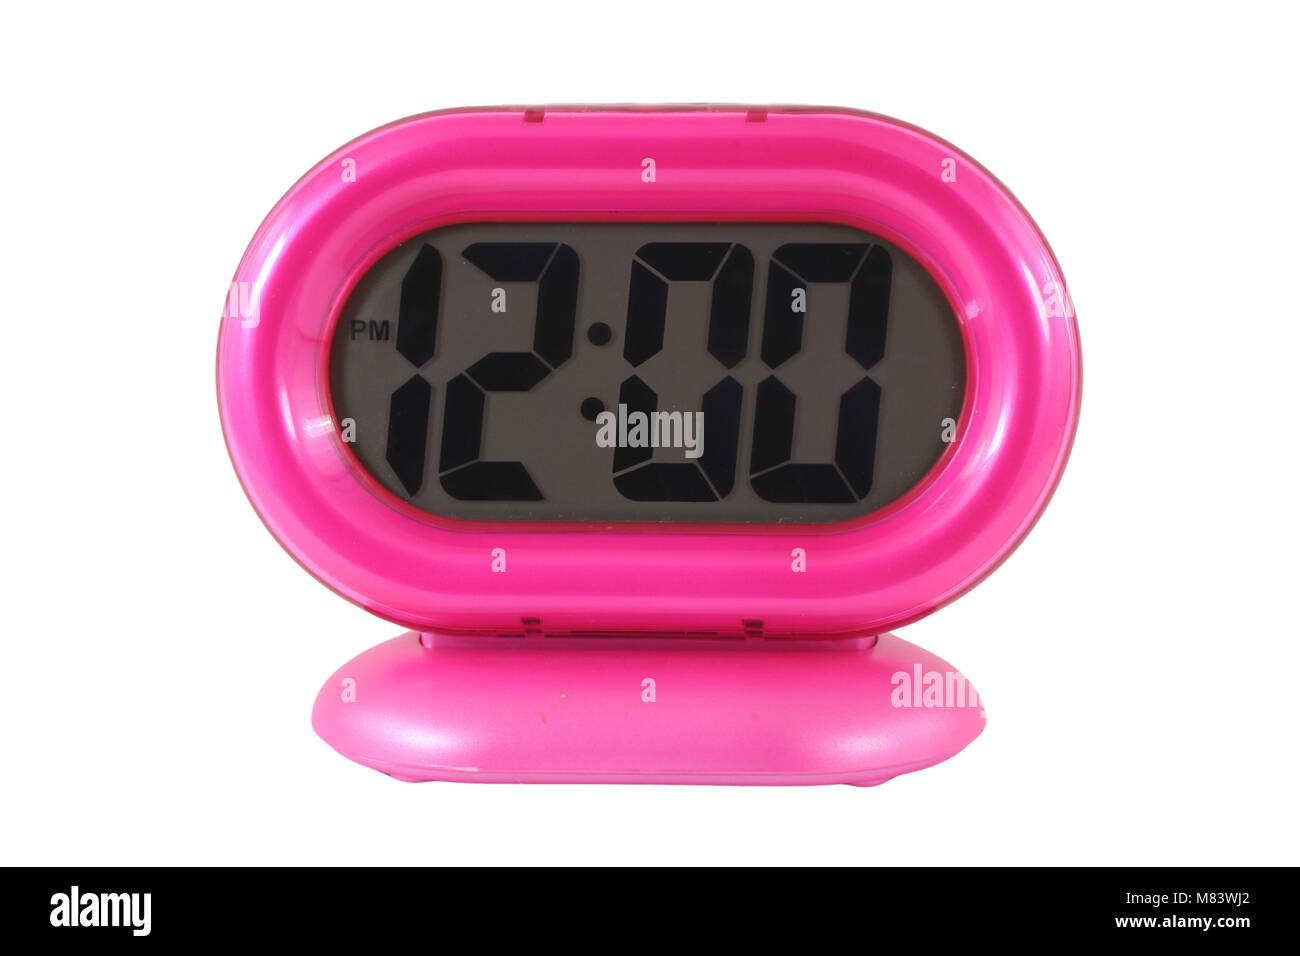 A isolated pink alarm clock Stock Photo